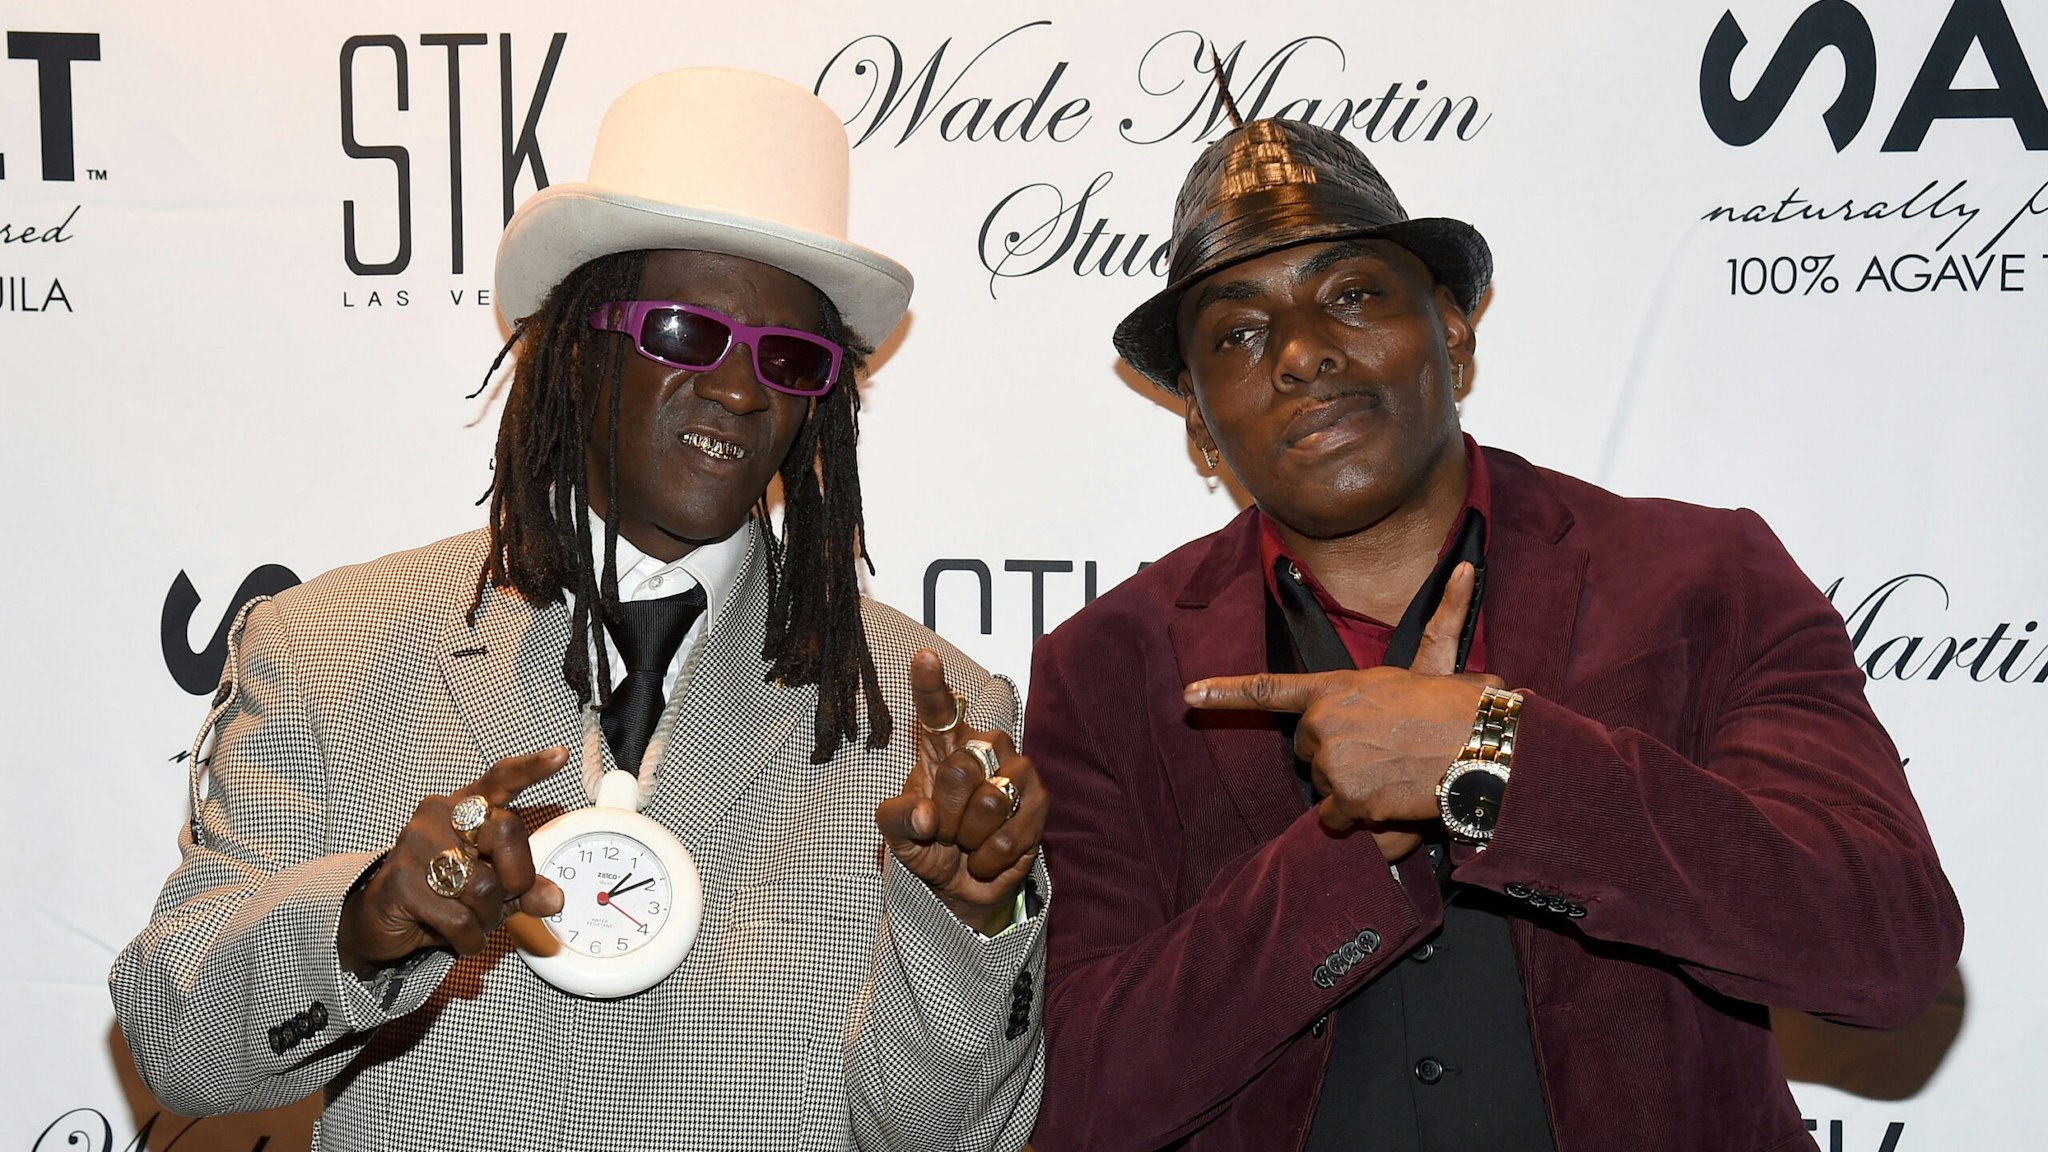 LAS VEGAS, NV - SEPTEMBER 01: Rapper Flavor Flav (L) and rapper/actor Coolio attend producer Wade Martin's premiere of music videos by Flavor Flav and Coolio, the first ever to use full-HD virtual reality technology, at STK at The Cosmopolitan of Las Vegas on September 1, 2015 in Las Vegas, Nevada.